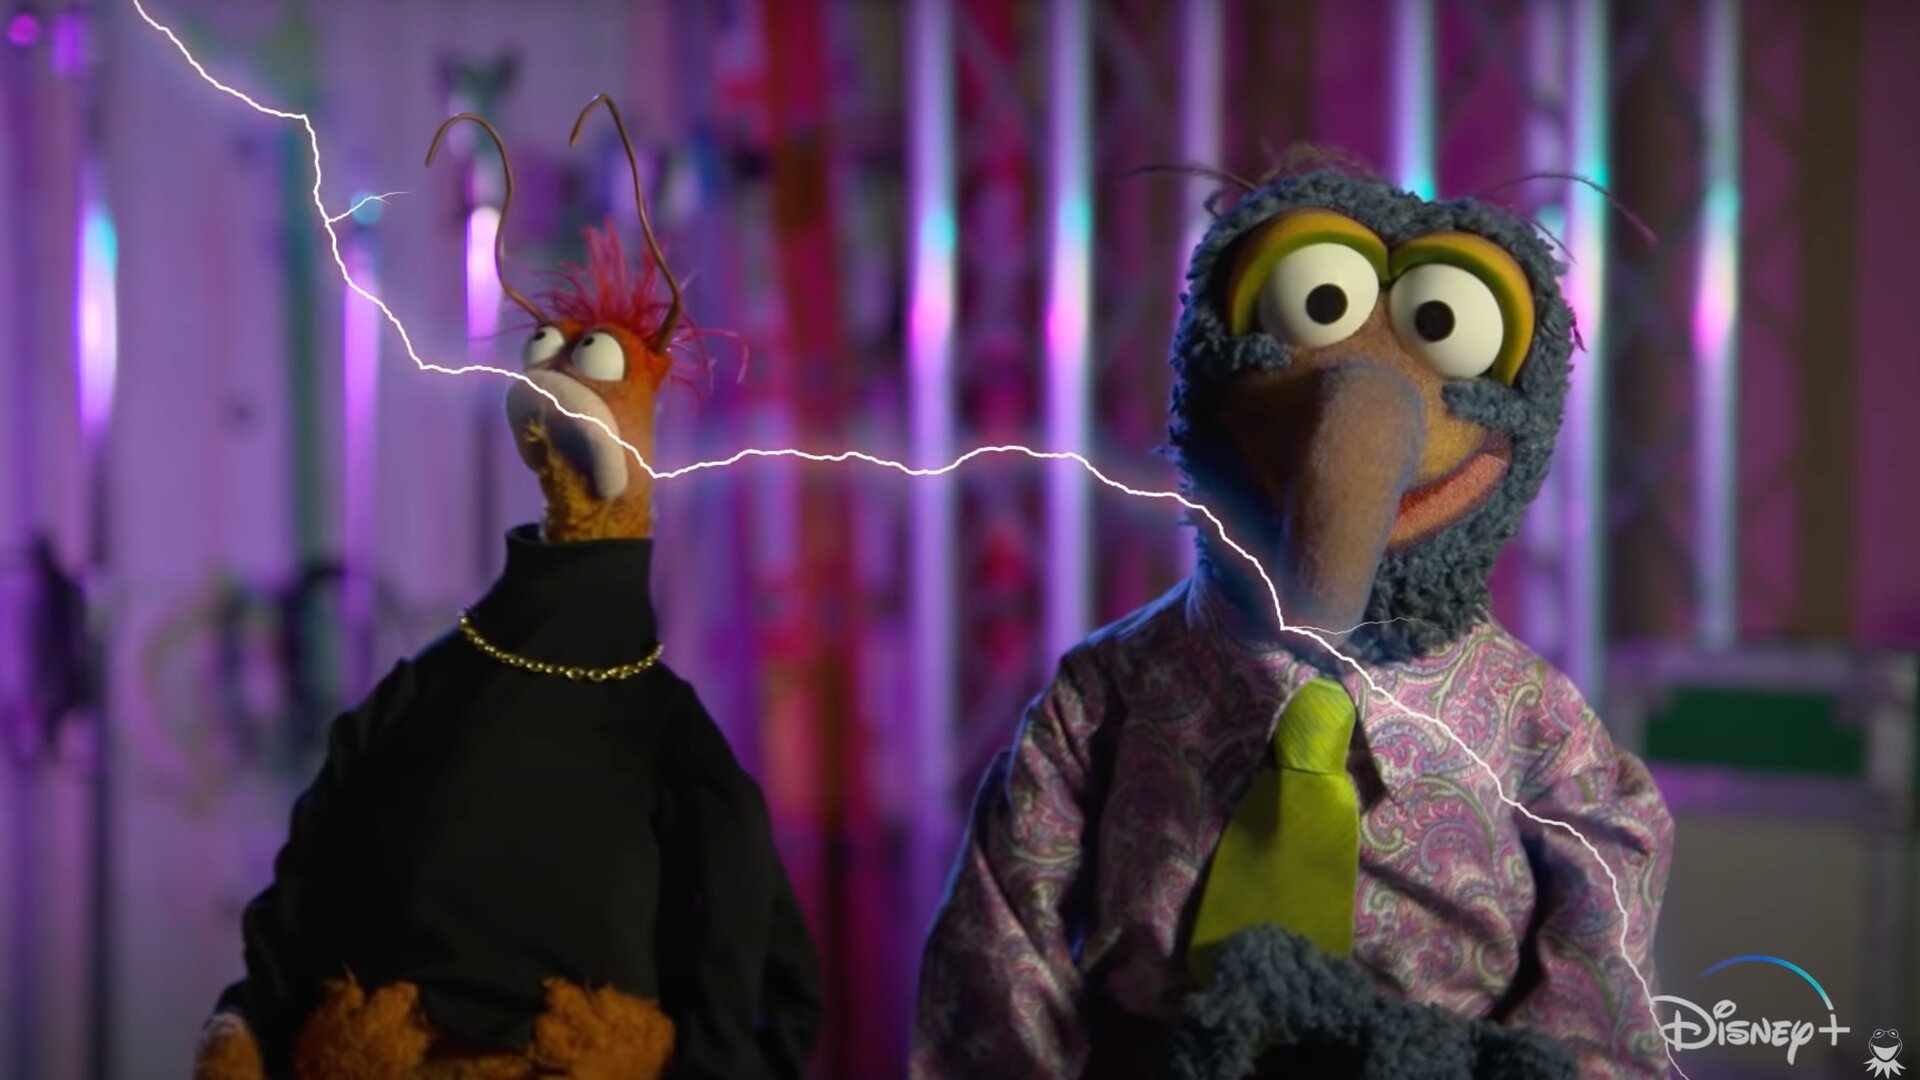 MUPPETS HAUNTED MANSION Is a Halloween Special Coming to Disney+ and Here's a Promo Spot